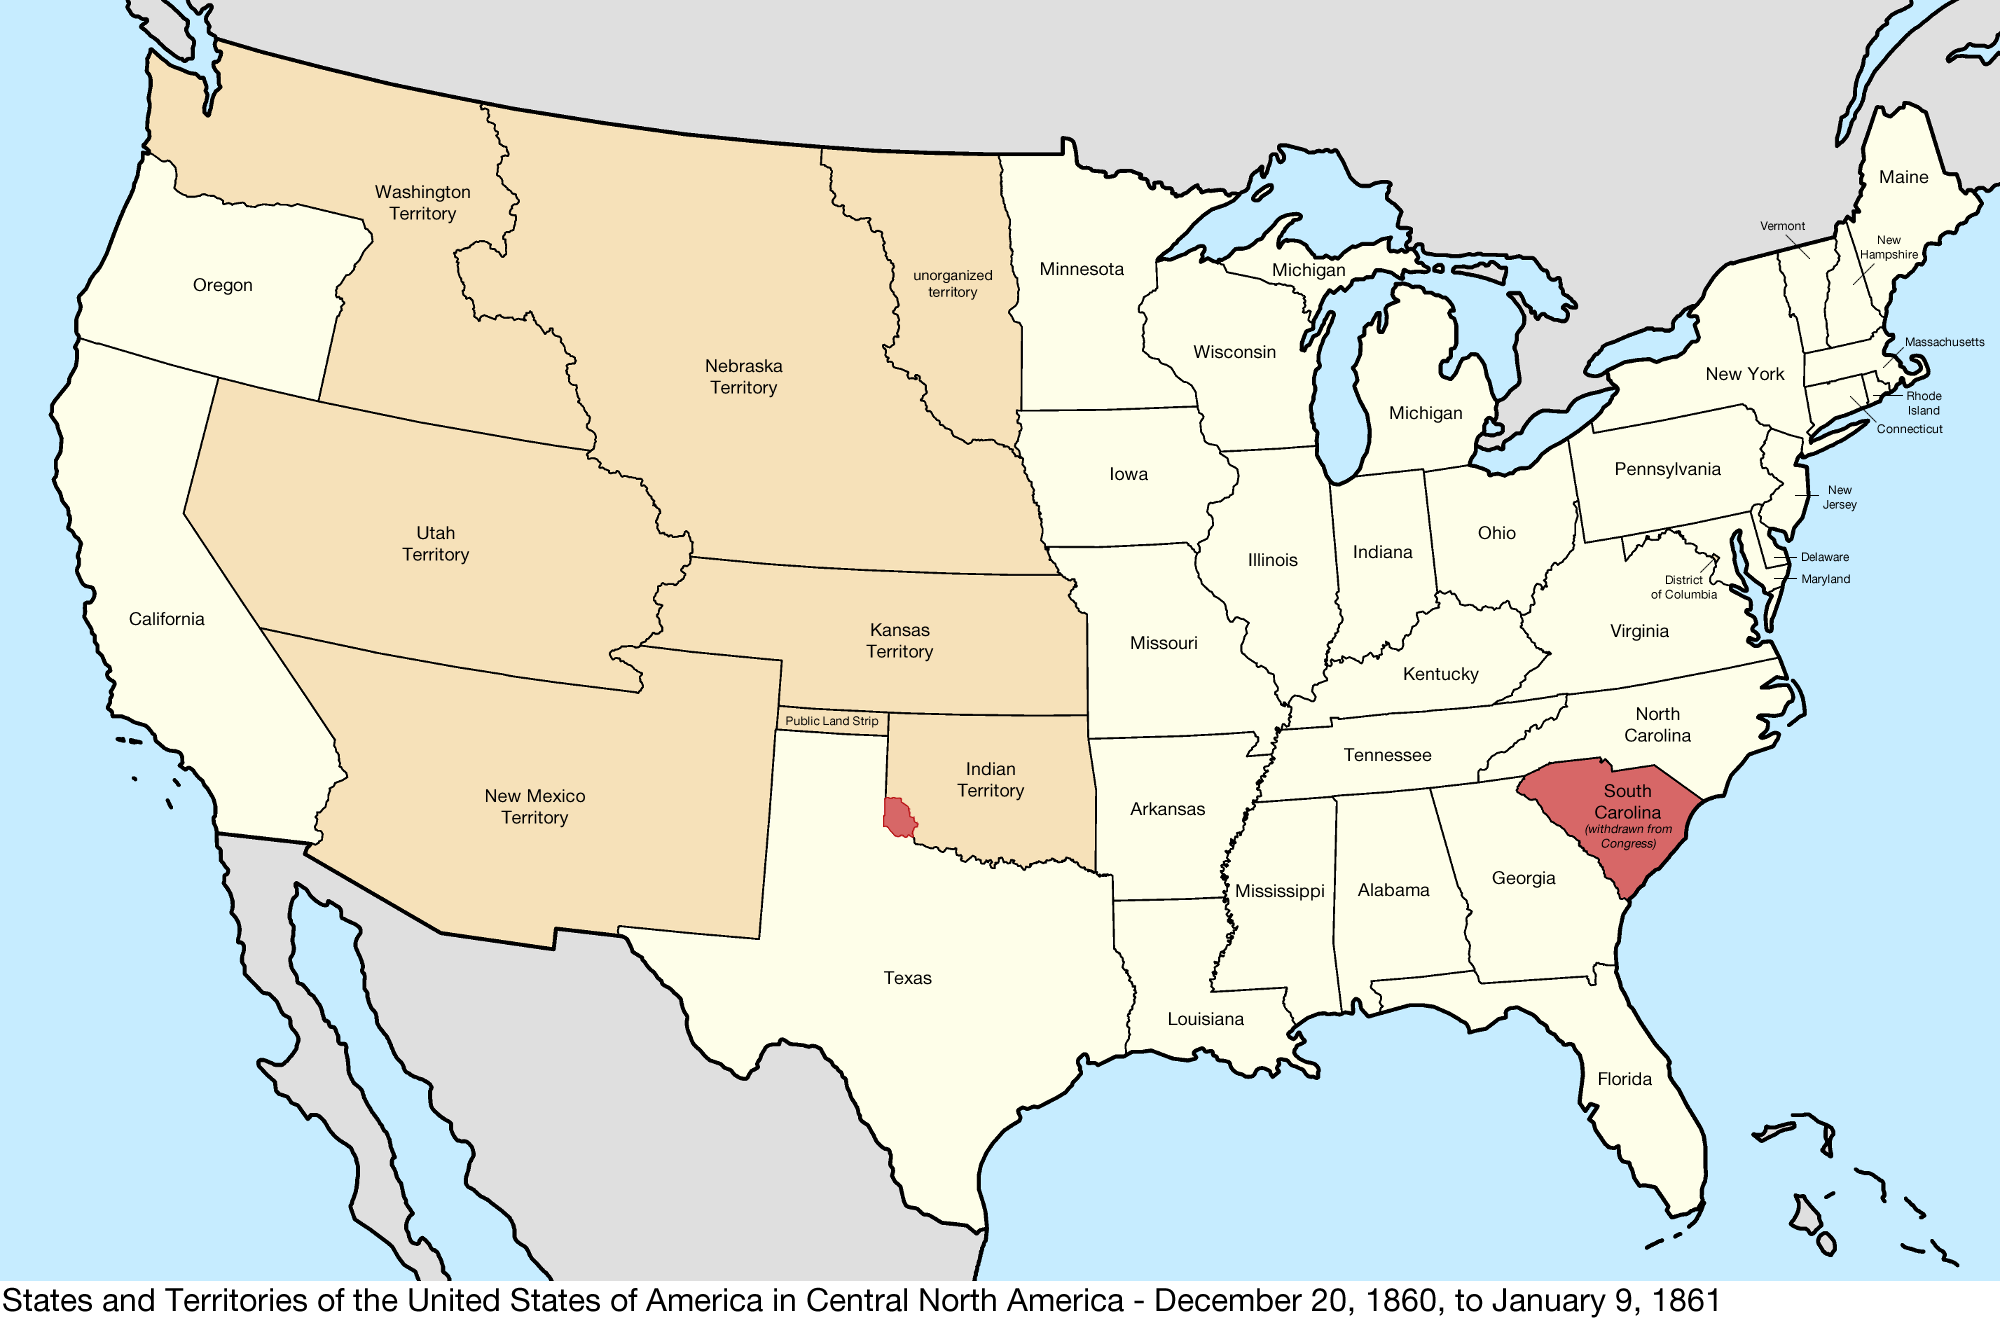 Map Of Usa In 1860 File:United States Central map 1860 12 20 to 1861 01 09.png 